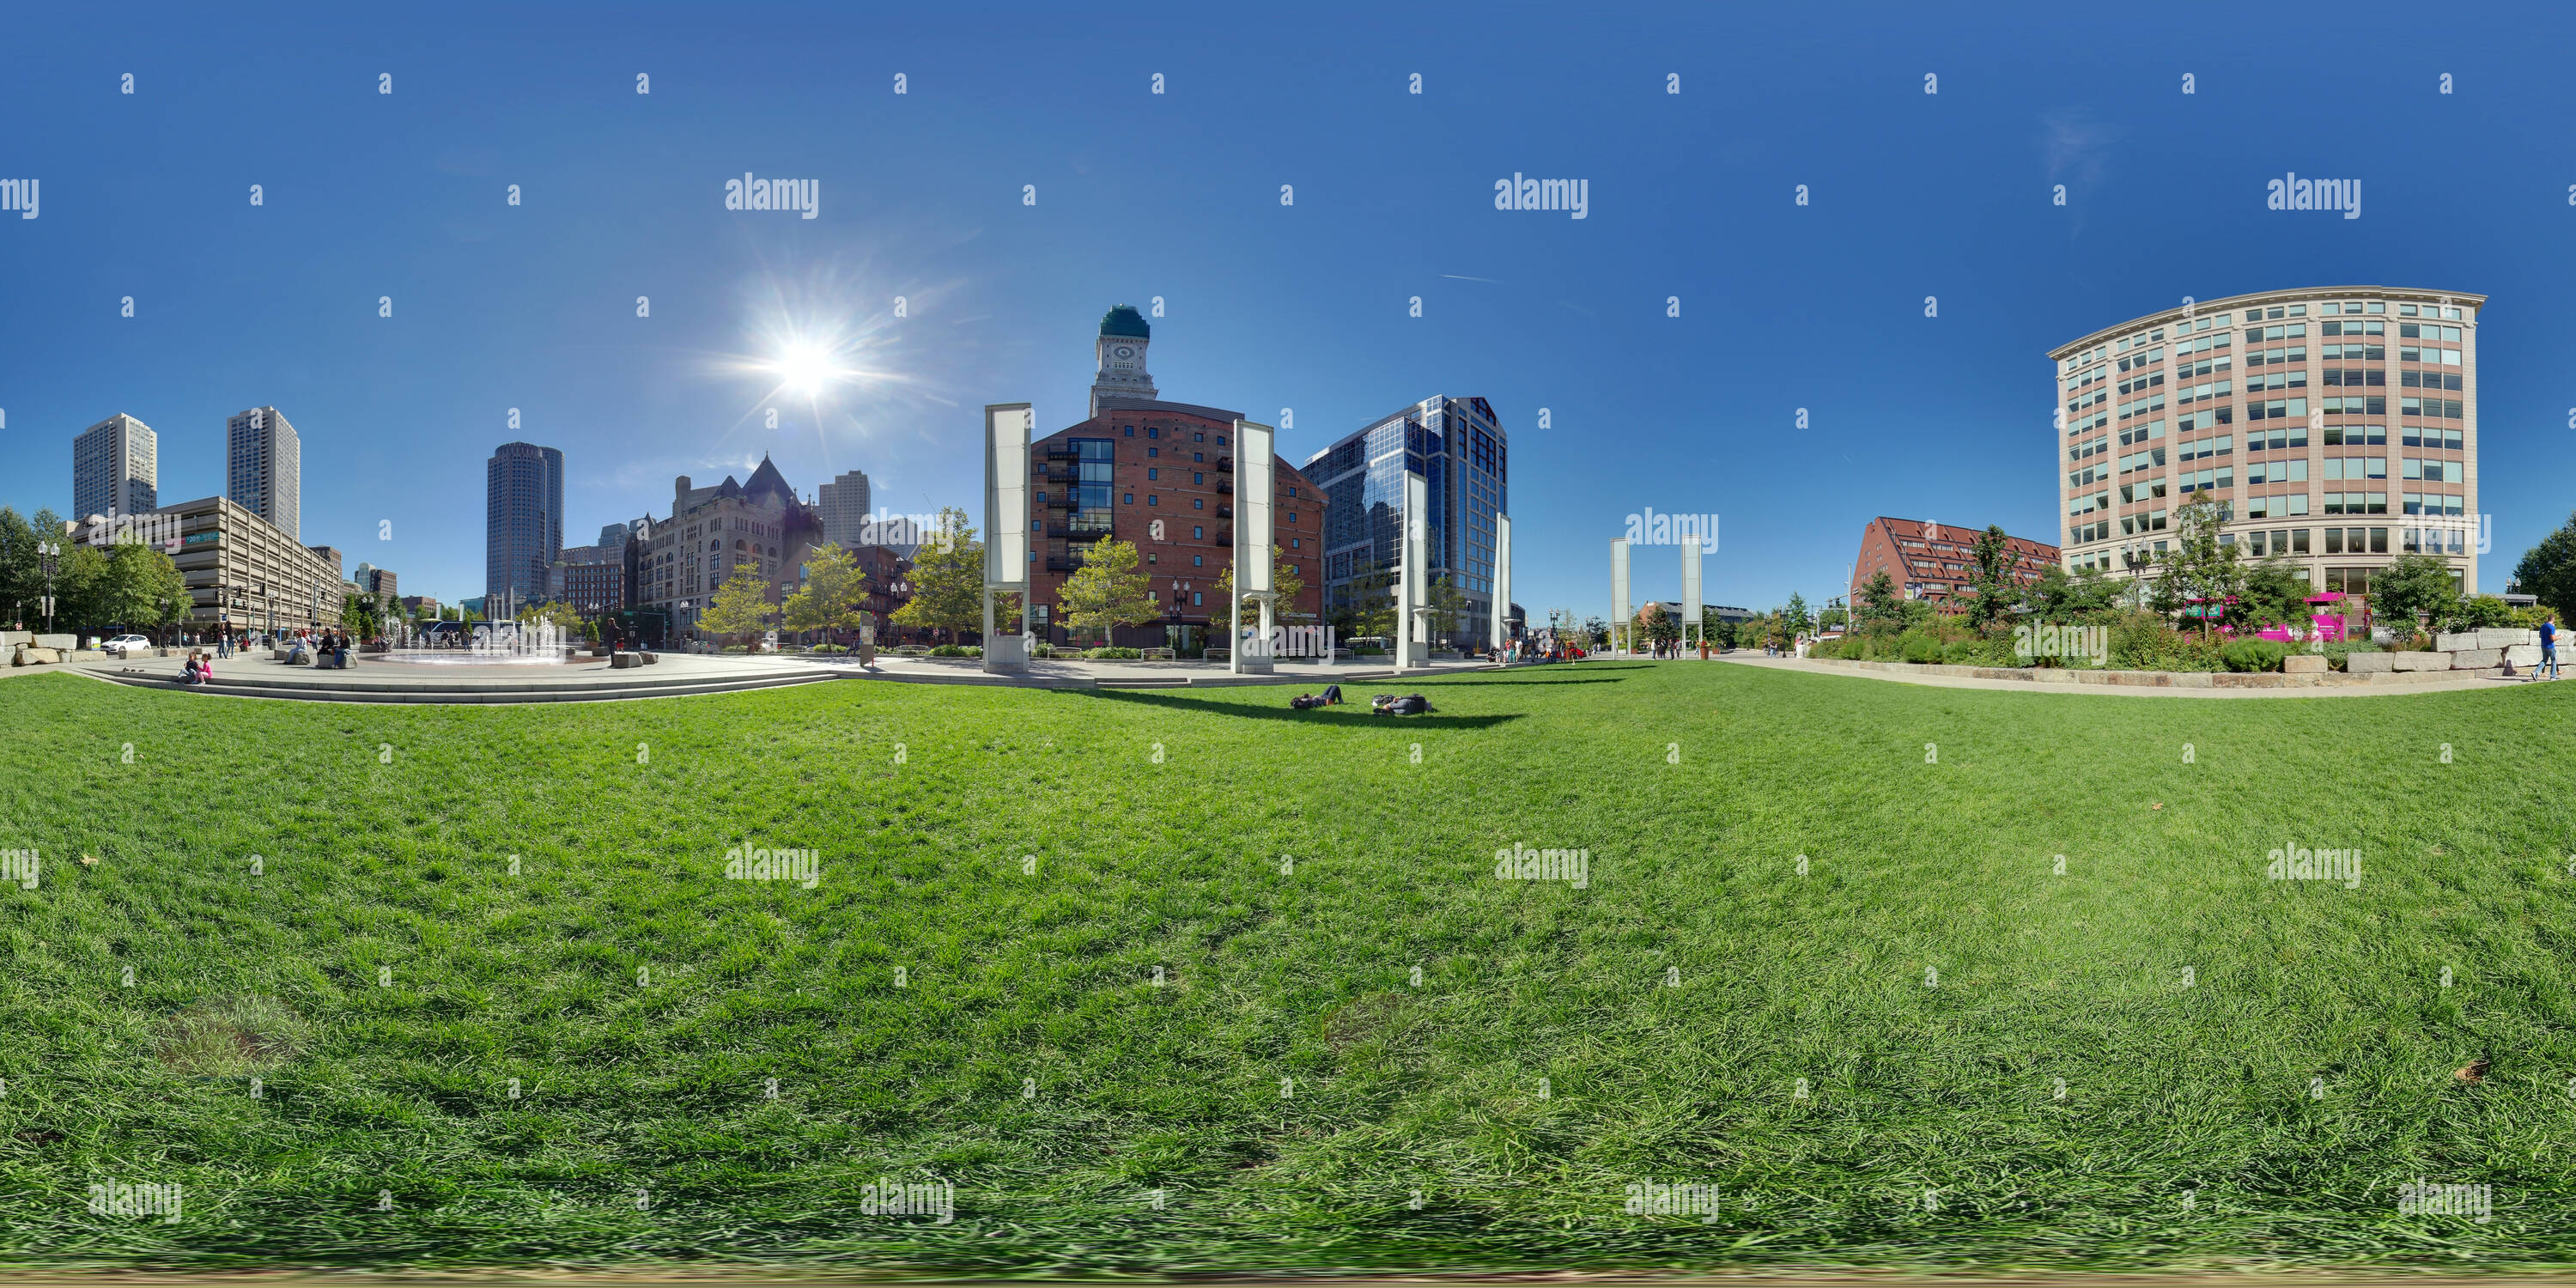 360 degree panoramic view of Rose Kennedy Greenway